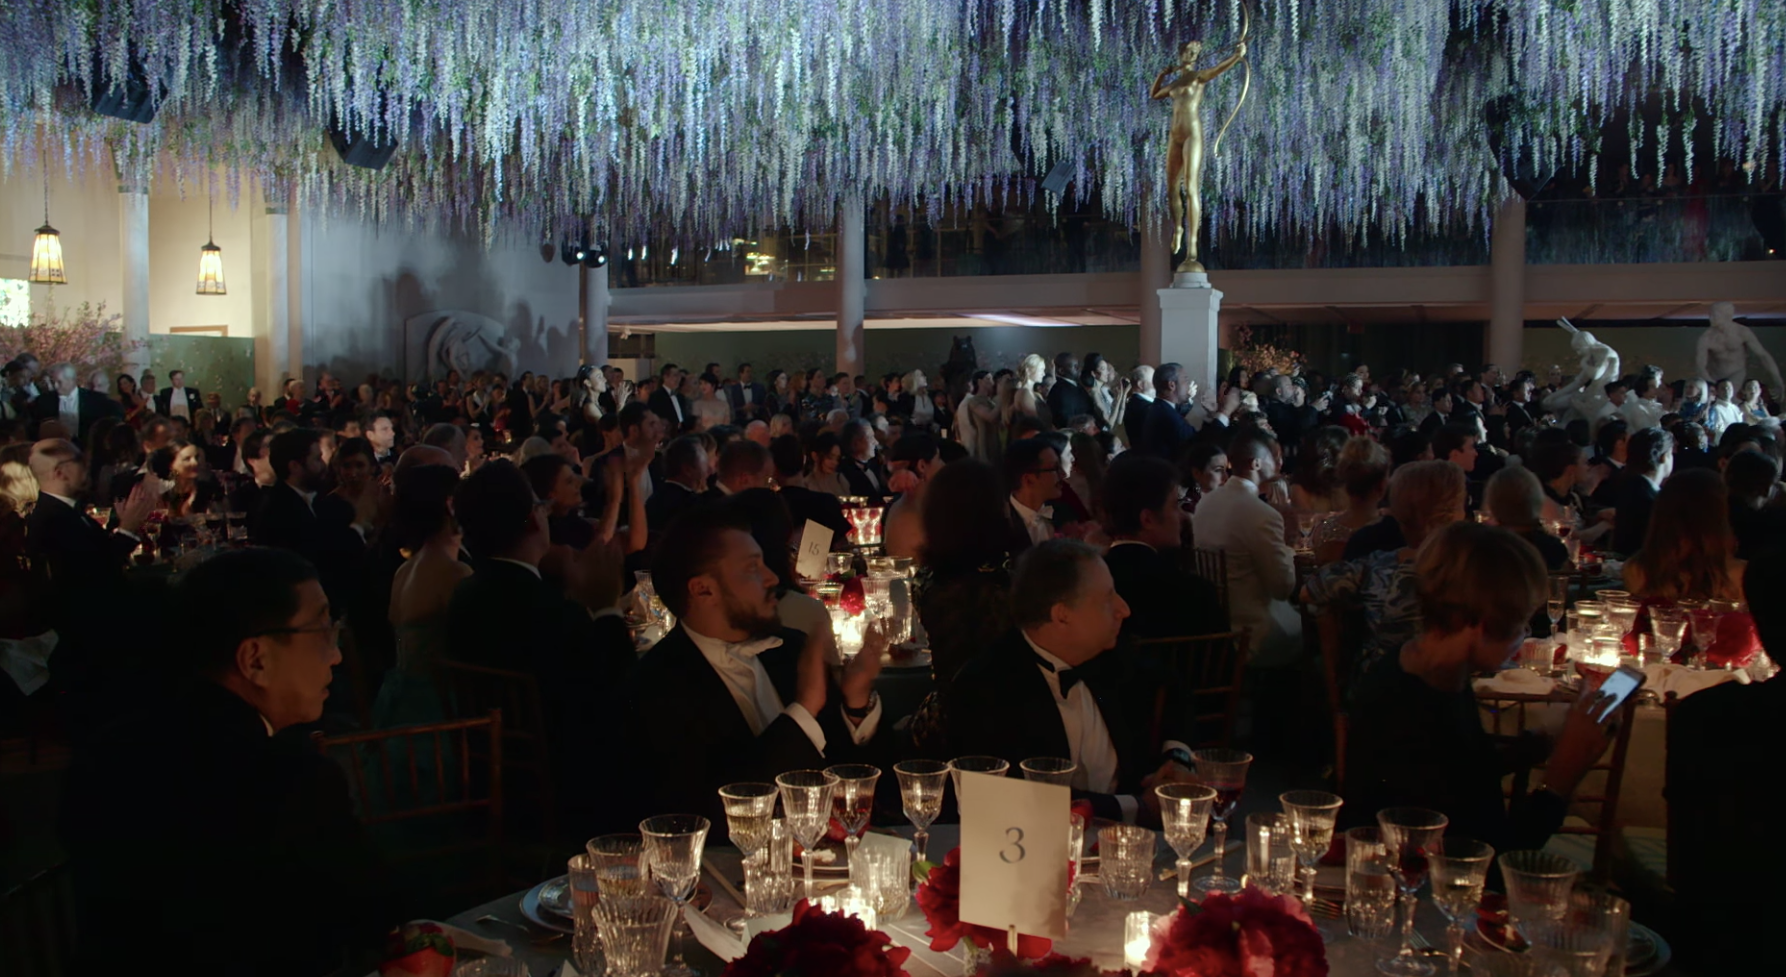 Guests seated at their dinner tables inside the Met Gala